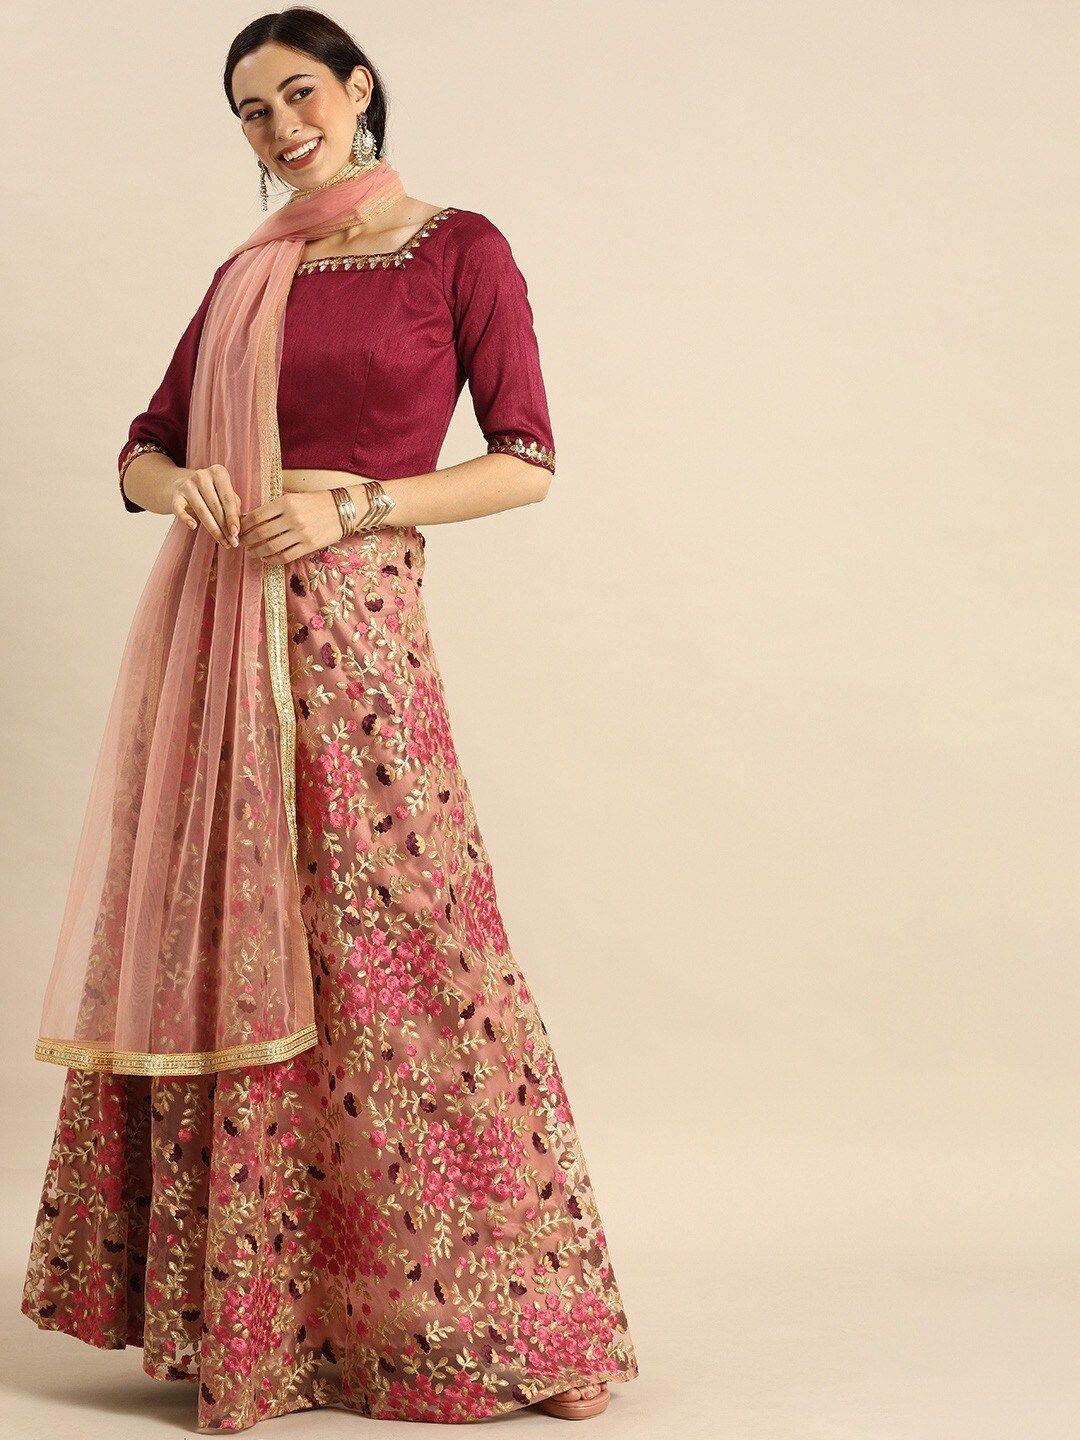 Fusionic Peach-Coloured & Gold-Toned Embroidered Semi-Stitched Lehenga & Unstitched Blouse With Dupatta